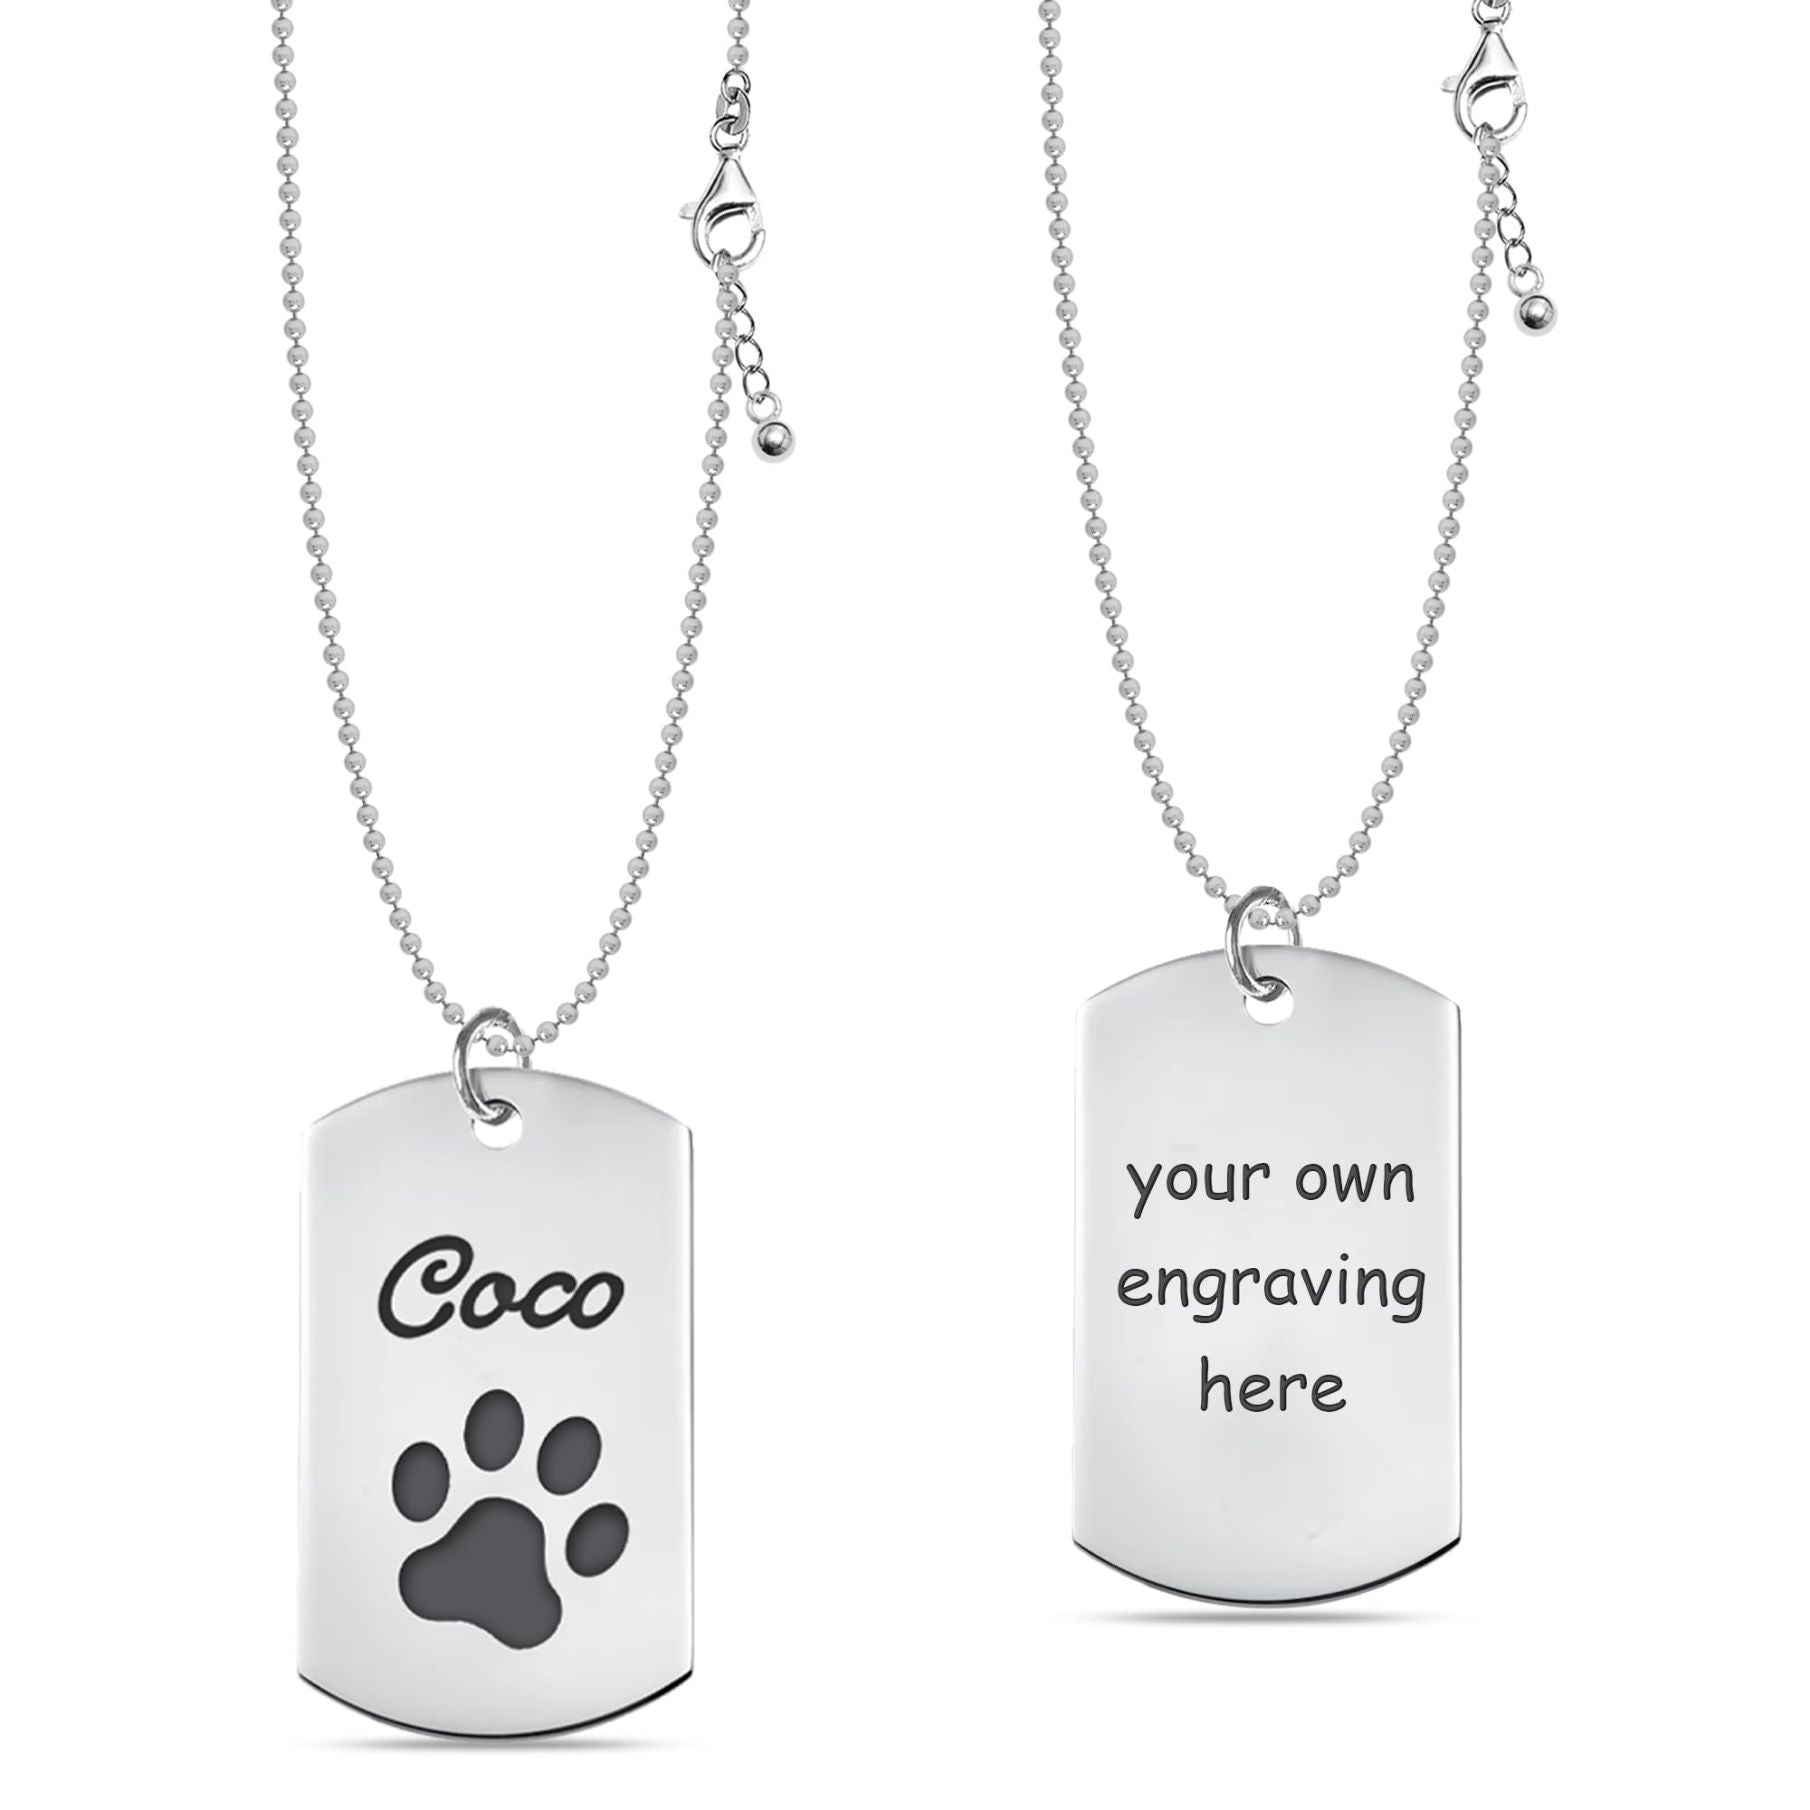 Personalised 925 Sterling Silver Engraved Pets Paw Print Pendant Necklace For Men and Women